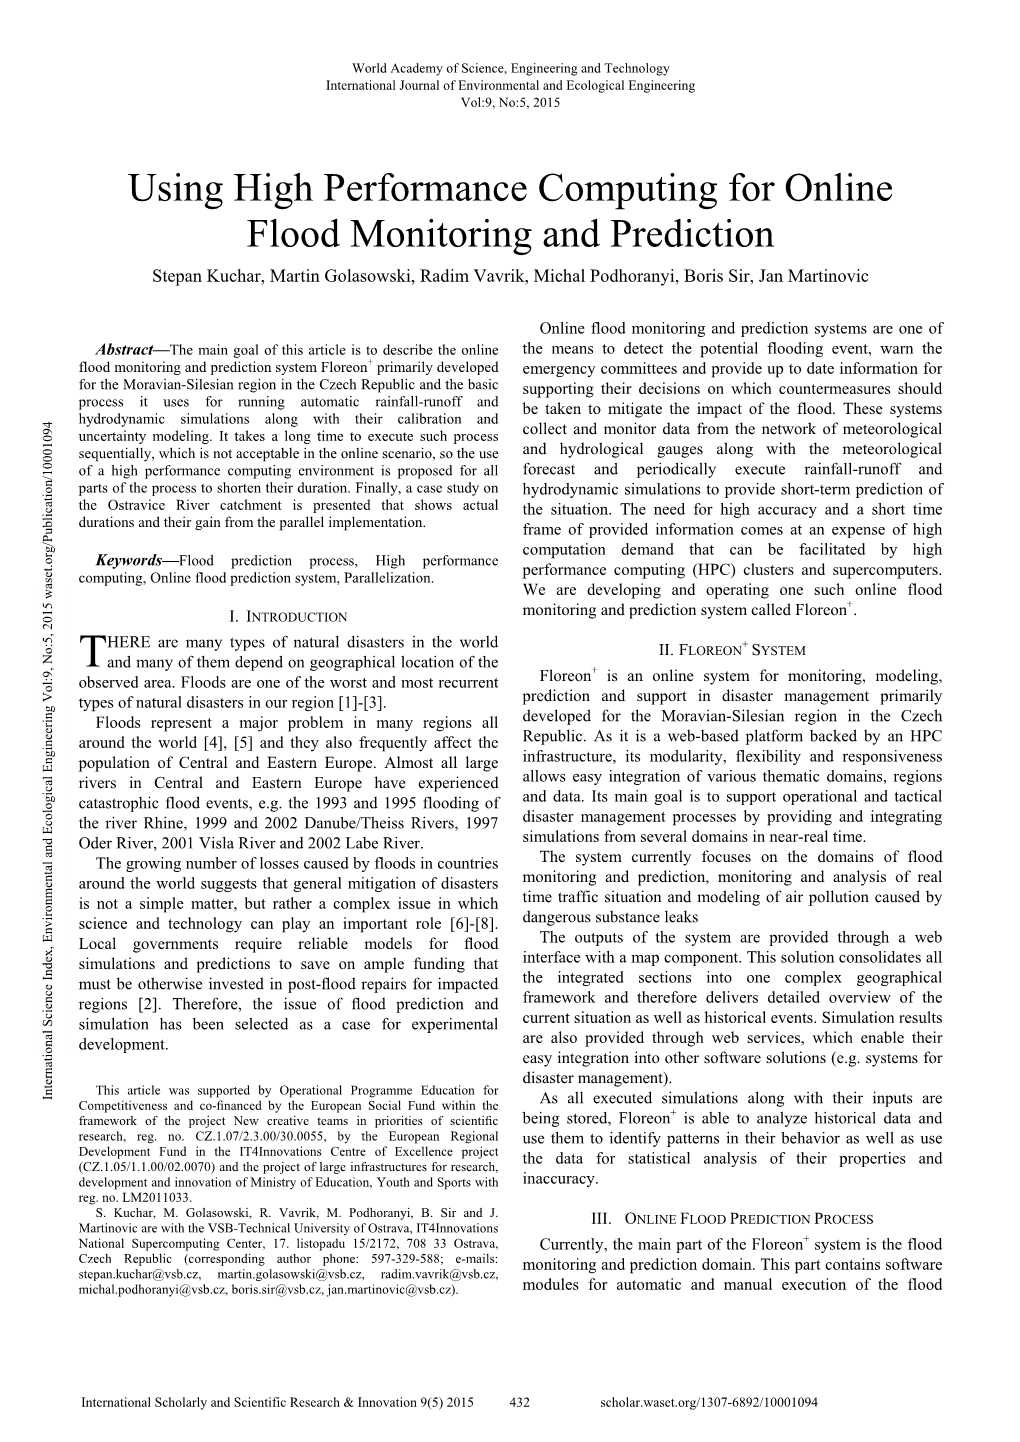 Using High Performance Computing for Online Flood Monitoring And